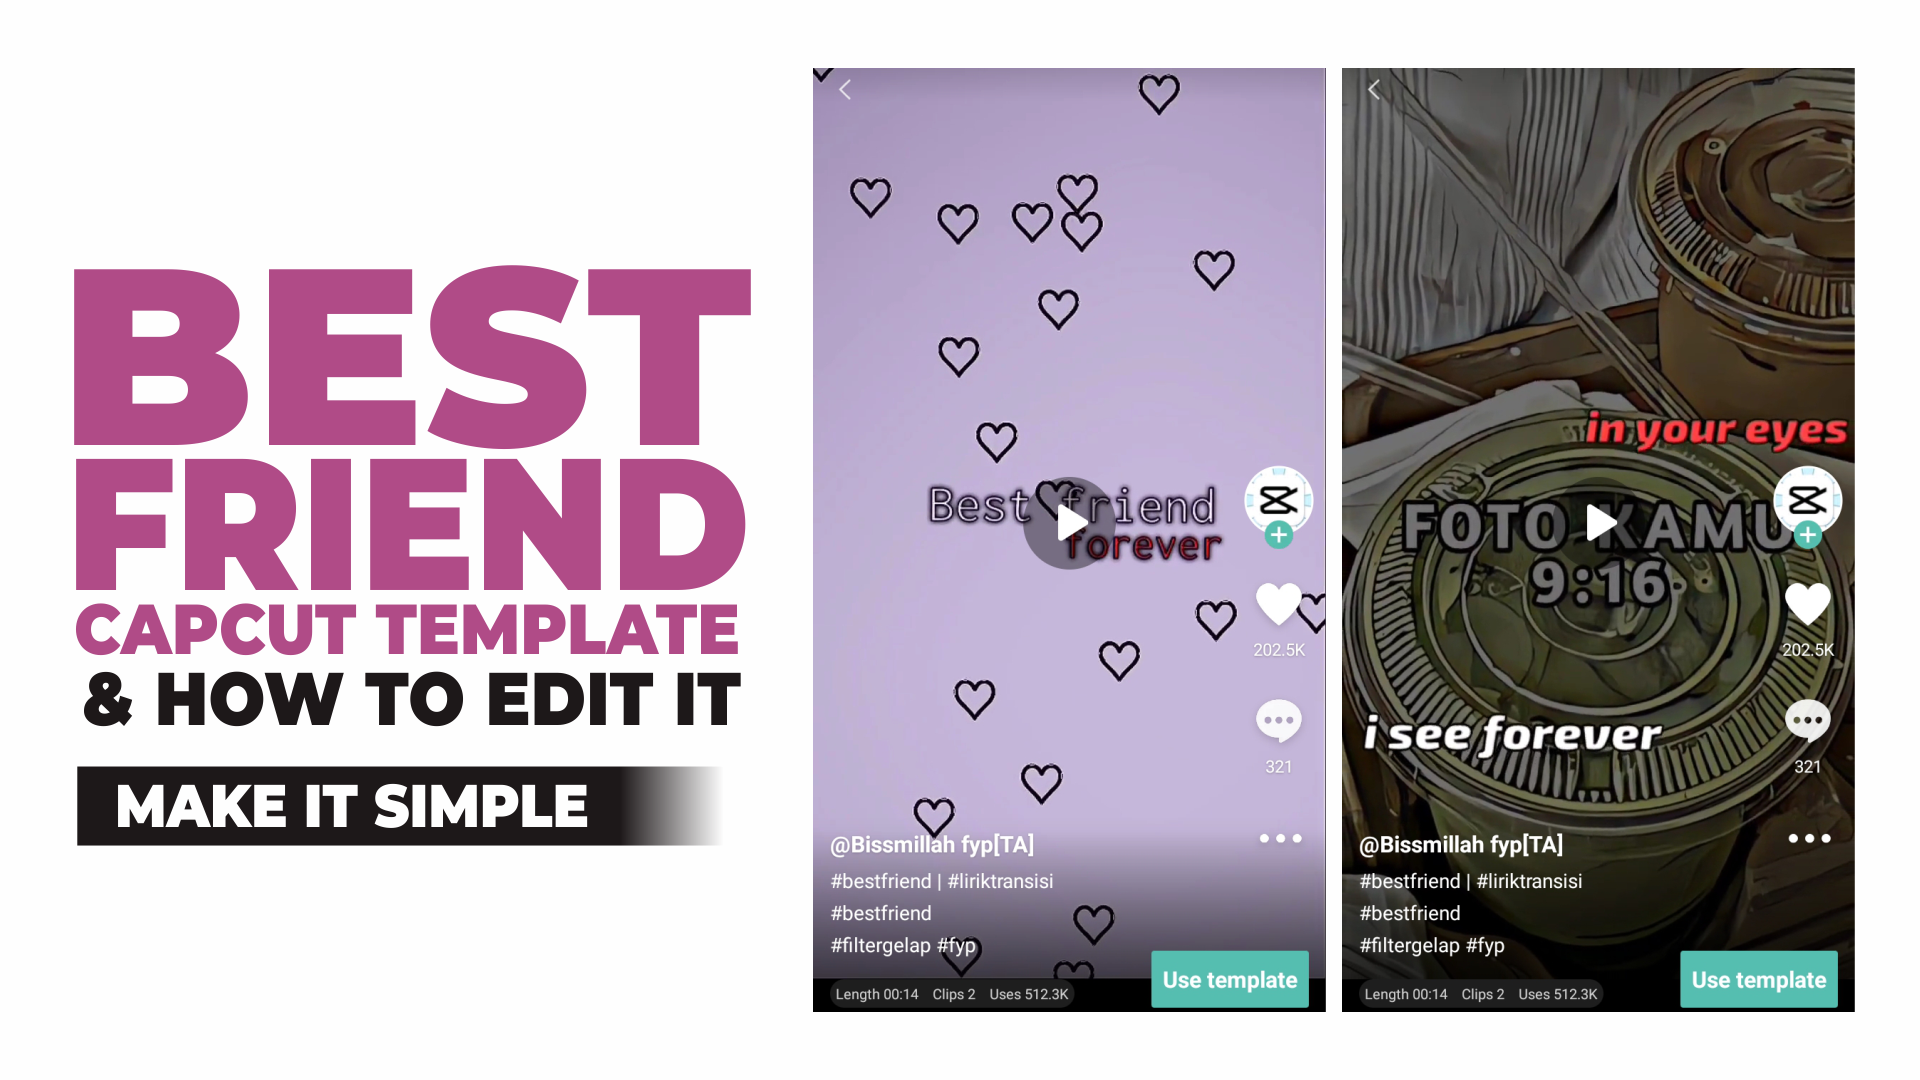 The Best Friend CapCut Template and How to Edit it, New Trend! Mang Idik